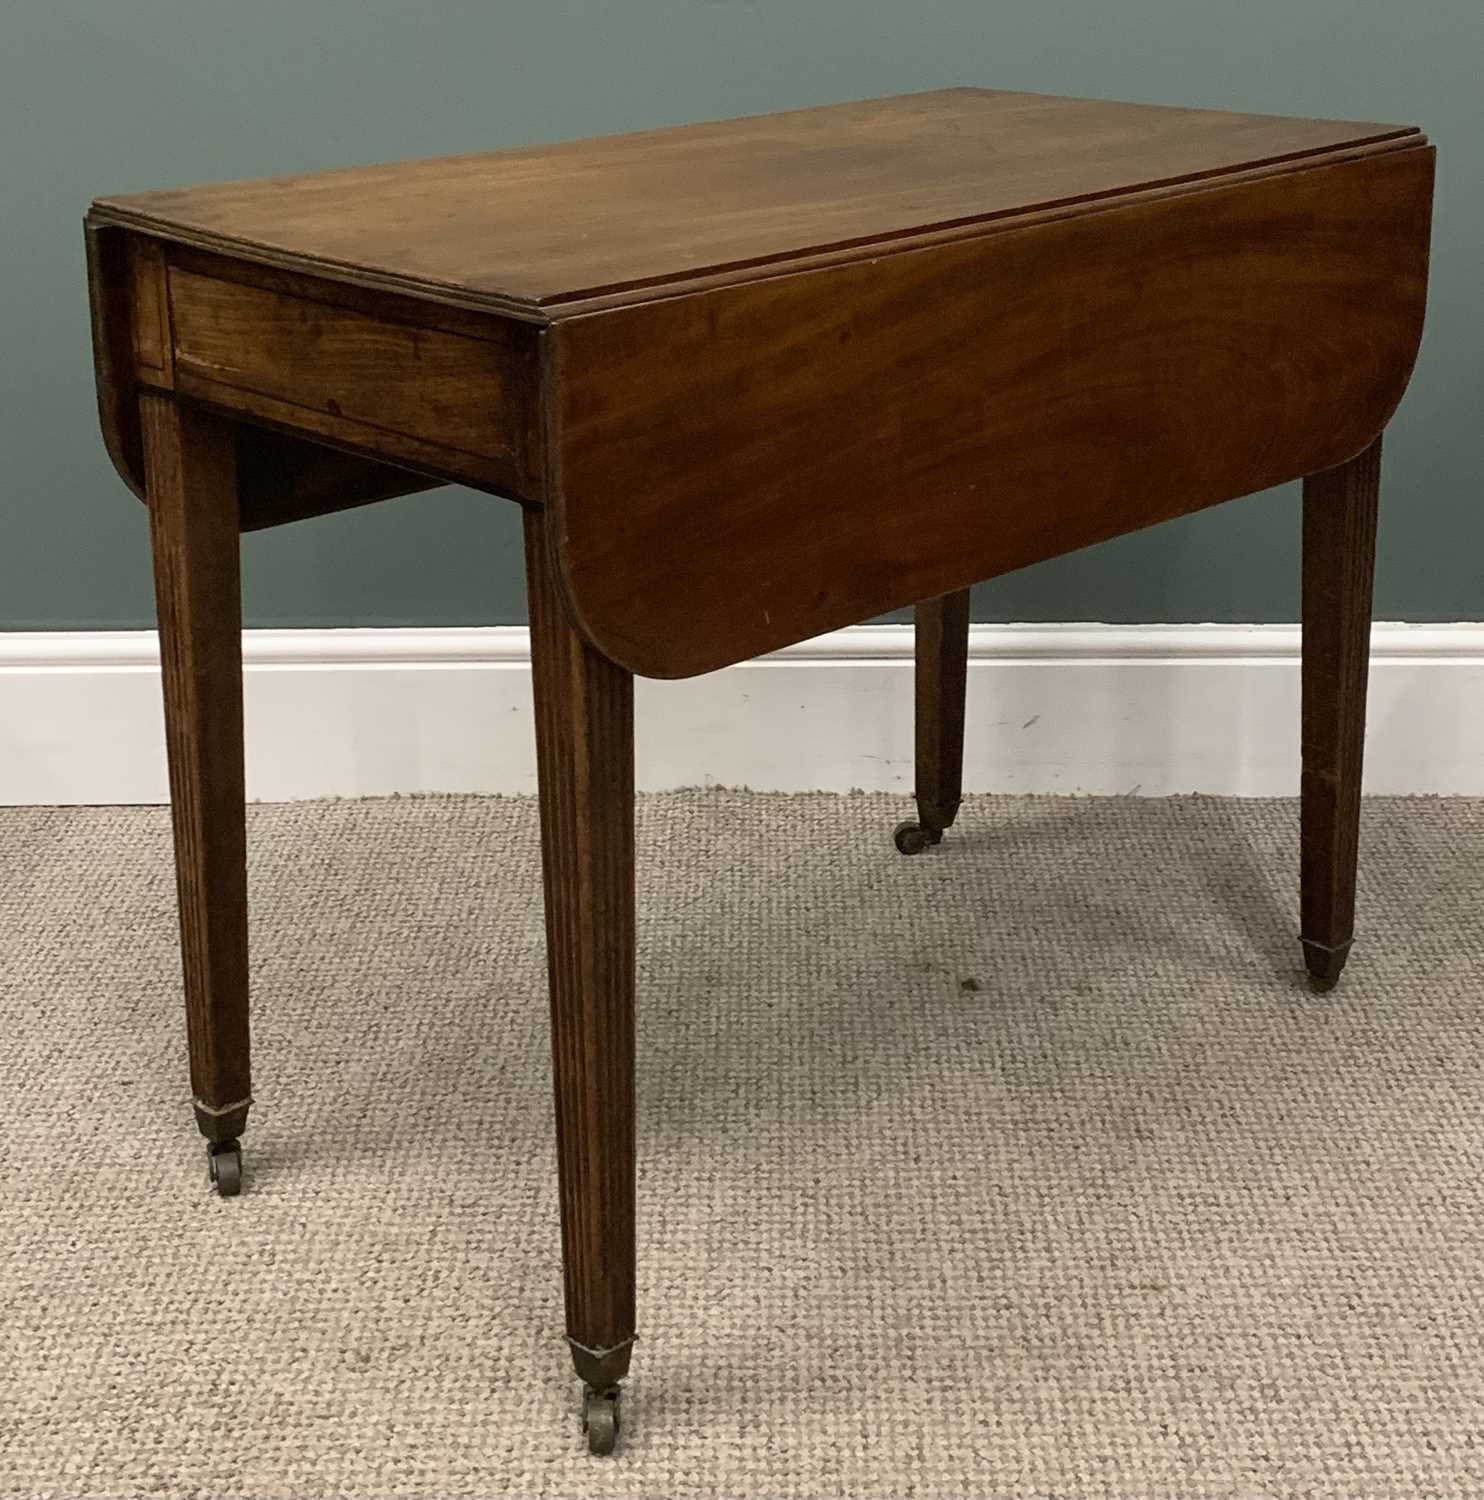 THREE ITEMS OF VINTAGE / ANTIQUE FURNITURE comprising mahogany Pembroke table, 69 (h) x 46 (w - - Image 3 of 6